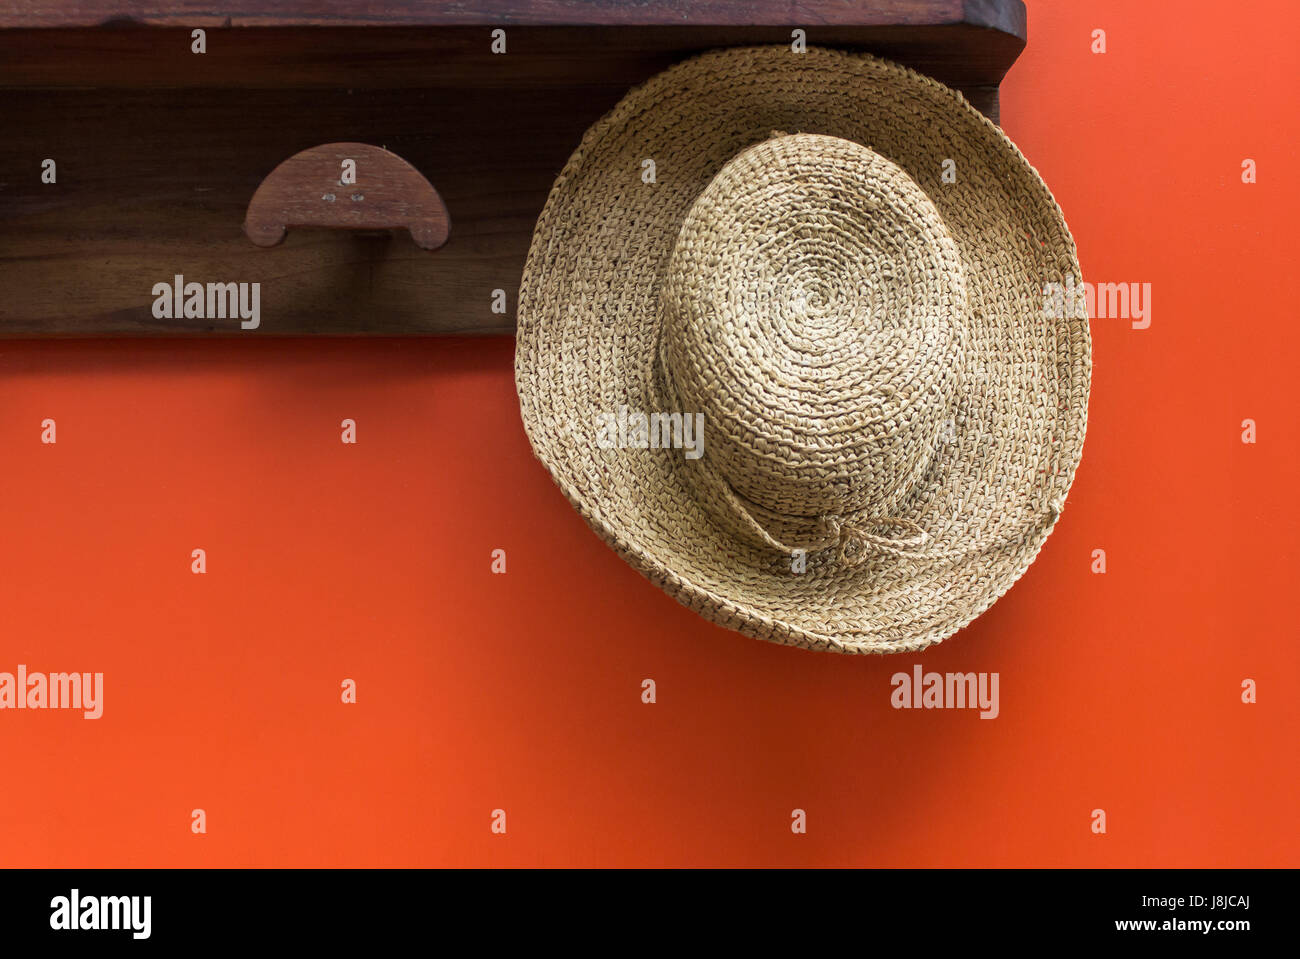 Straw hat on wooden hanger against vivid red wall Stock Photo